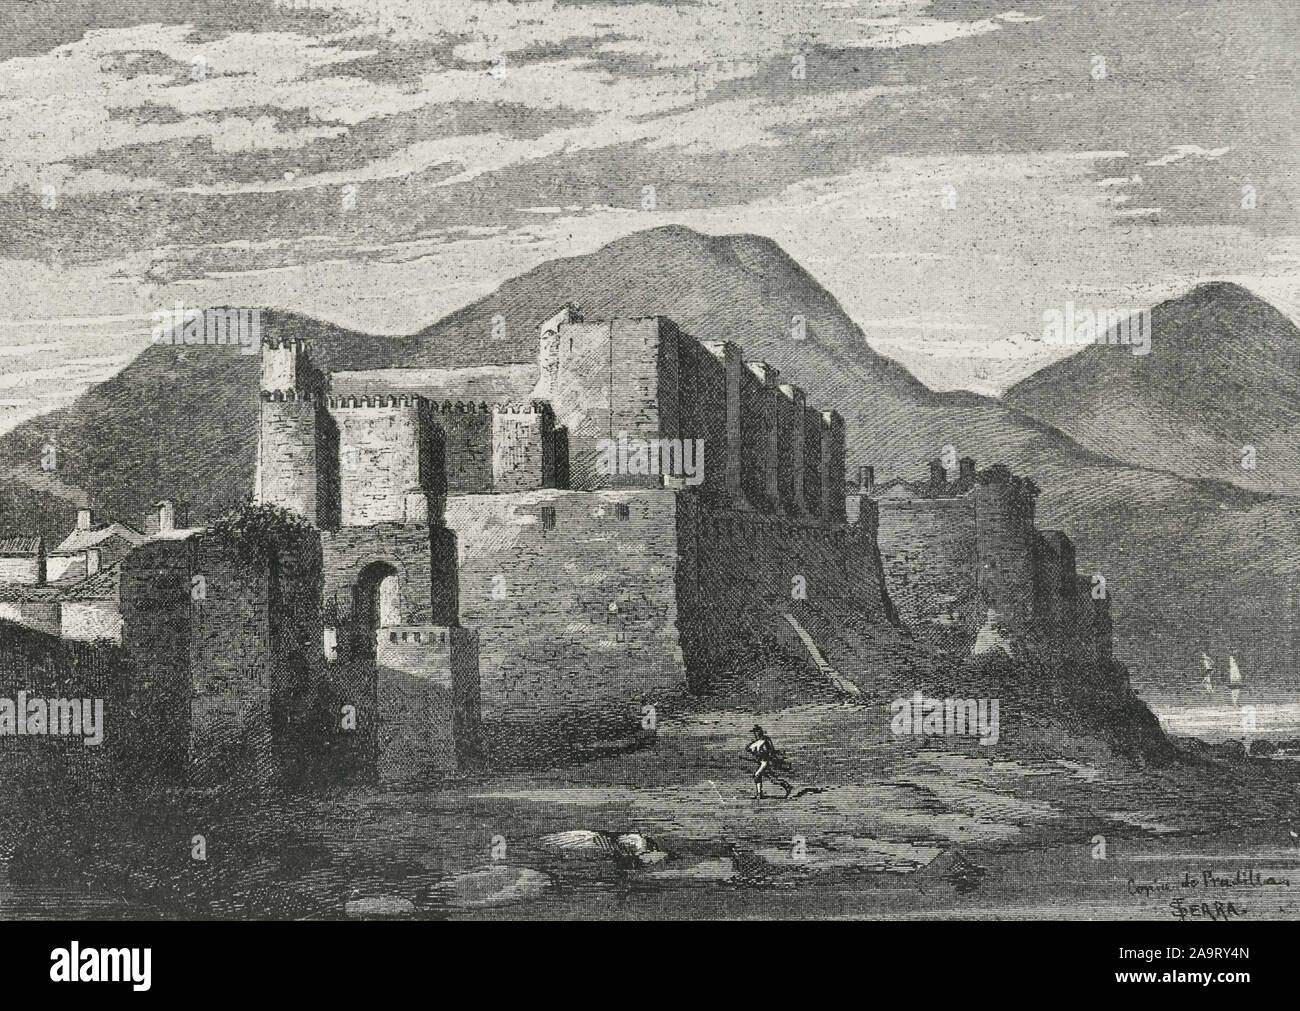 Spain, Andalusia, province of Cadiz, Tarifa. Castle of the Guzmans or Castle of Guzman el Bueno. It was built in 960 by Abd-ar-Rahman III, Caliph of Cordoba. Engraving by Serra after a painting by Pradilla.  Museo Militar, 1883. Stock Photo